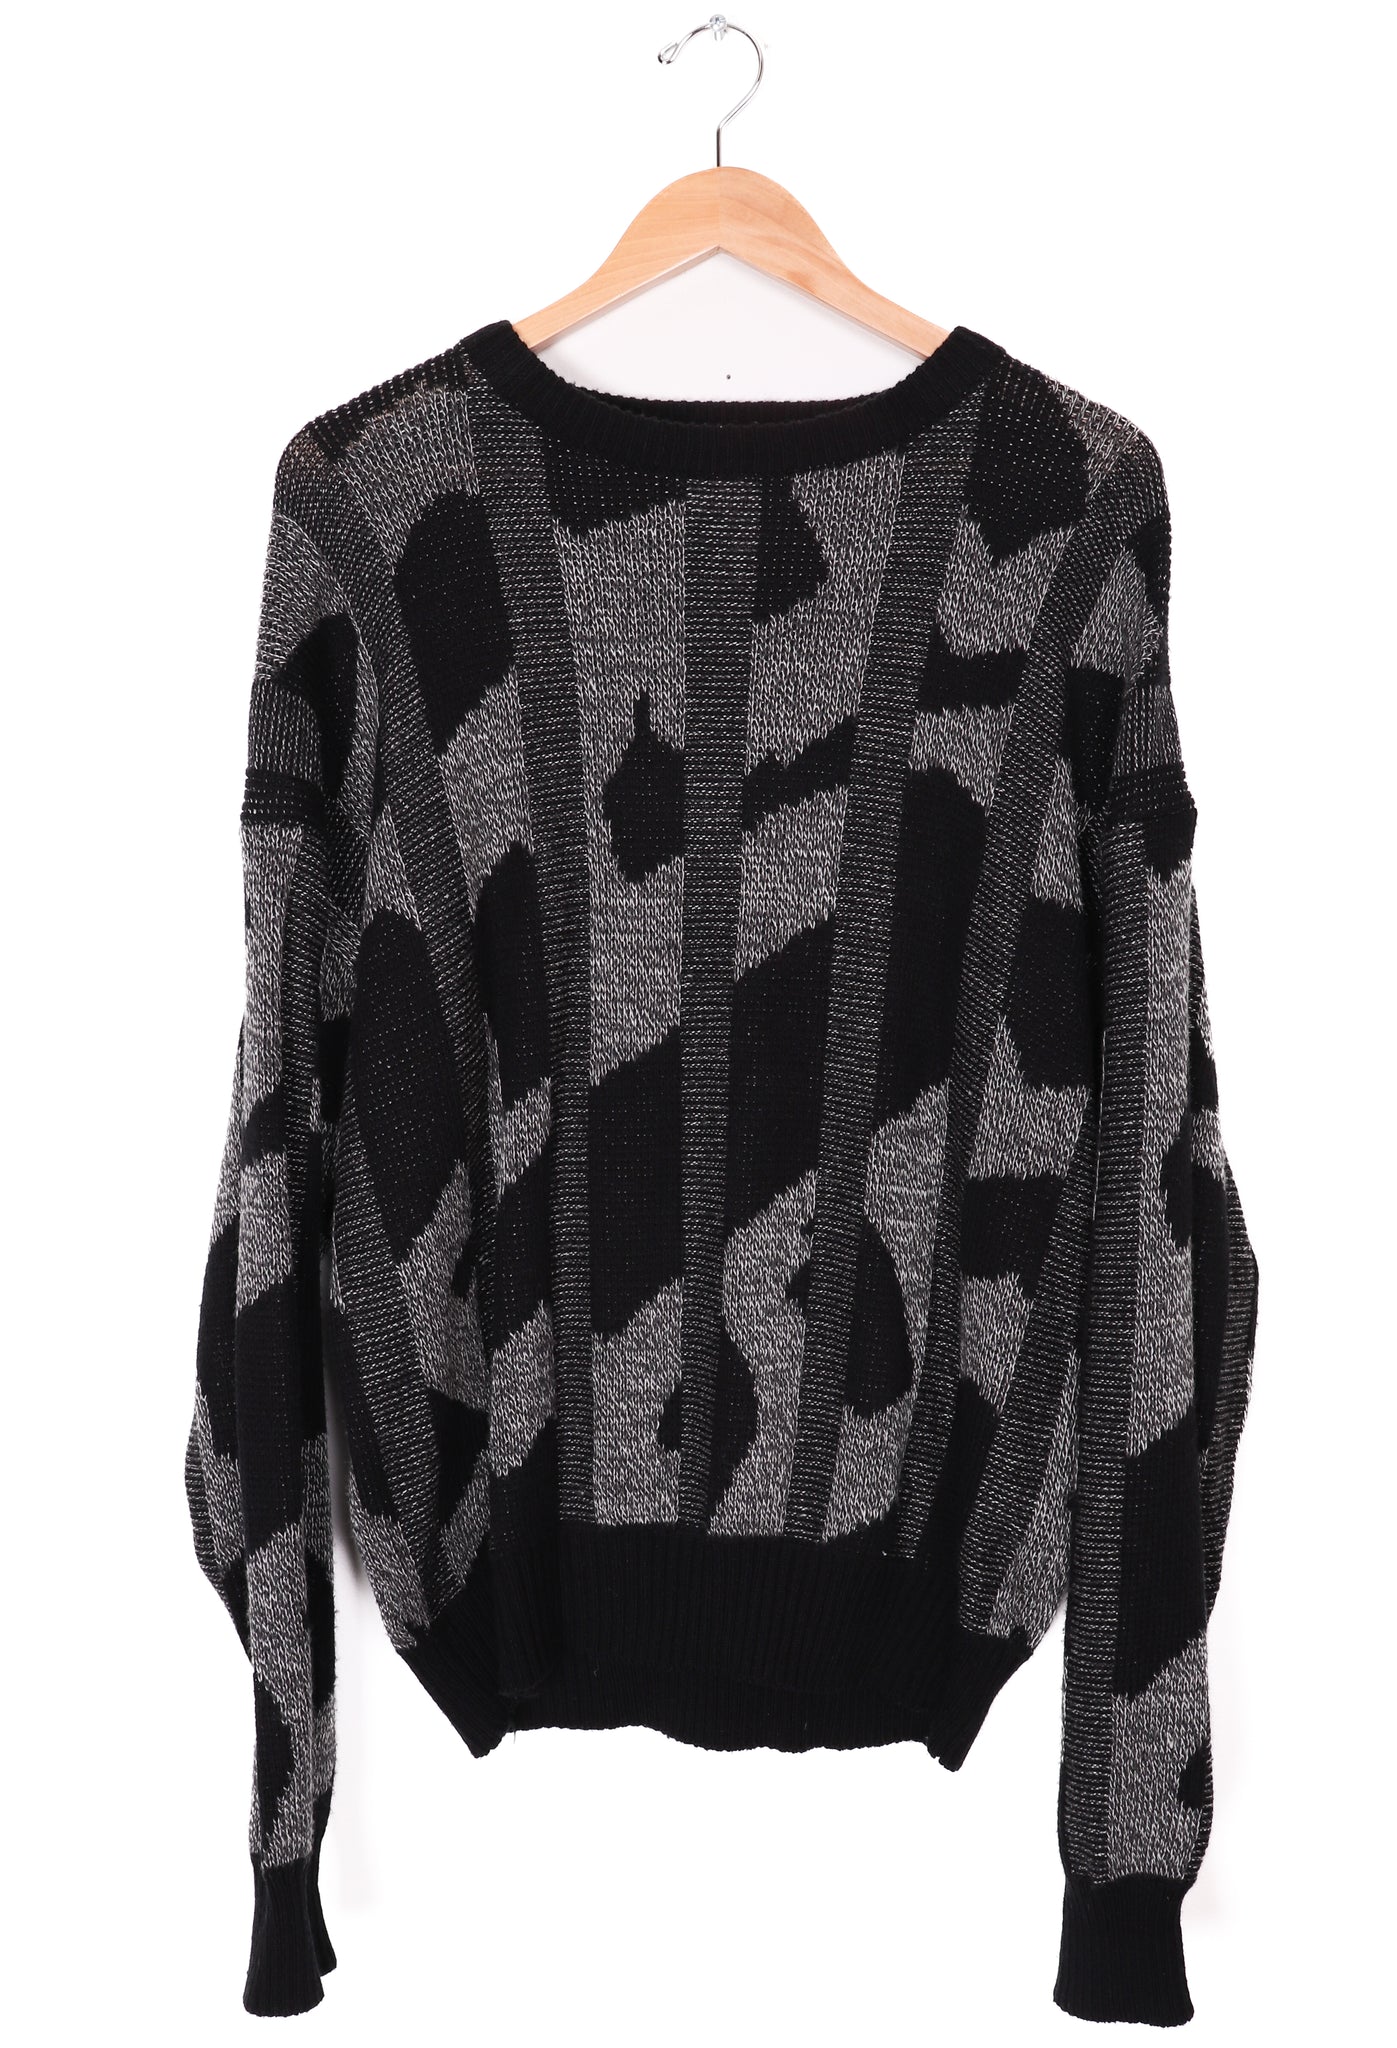 90s Expressions Limited Editions Black Sweater